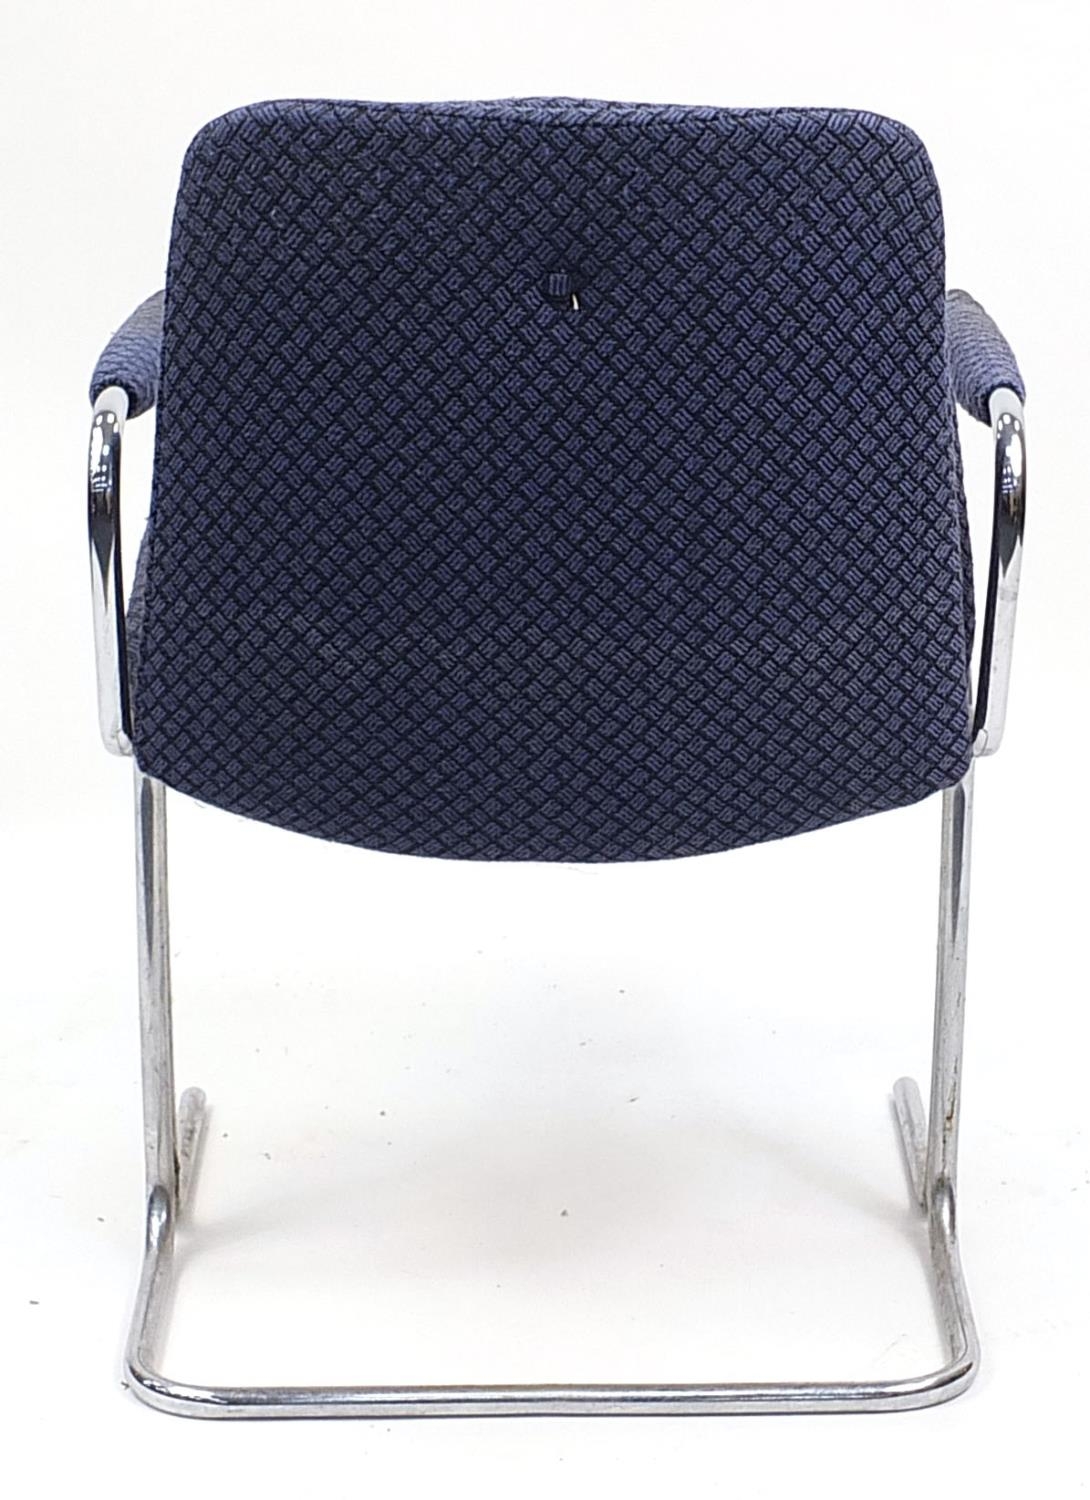 Vintage industrial design chromed chair with blue upholstery, 82cm high - Image 3 of 3